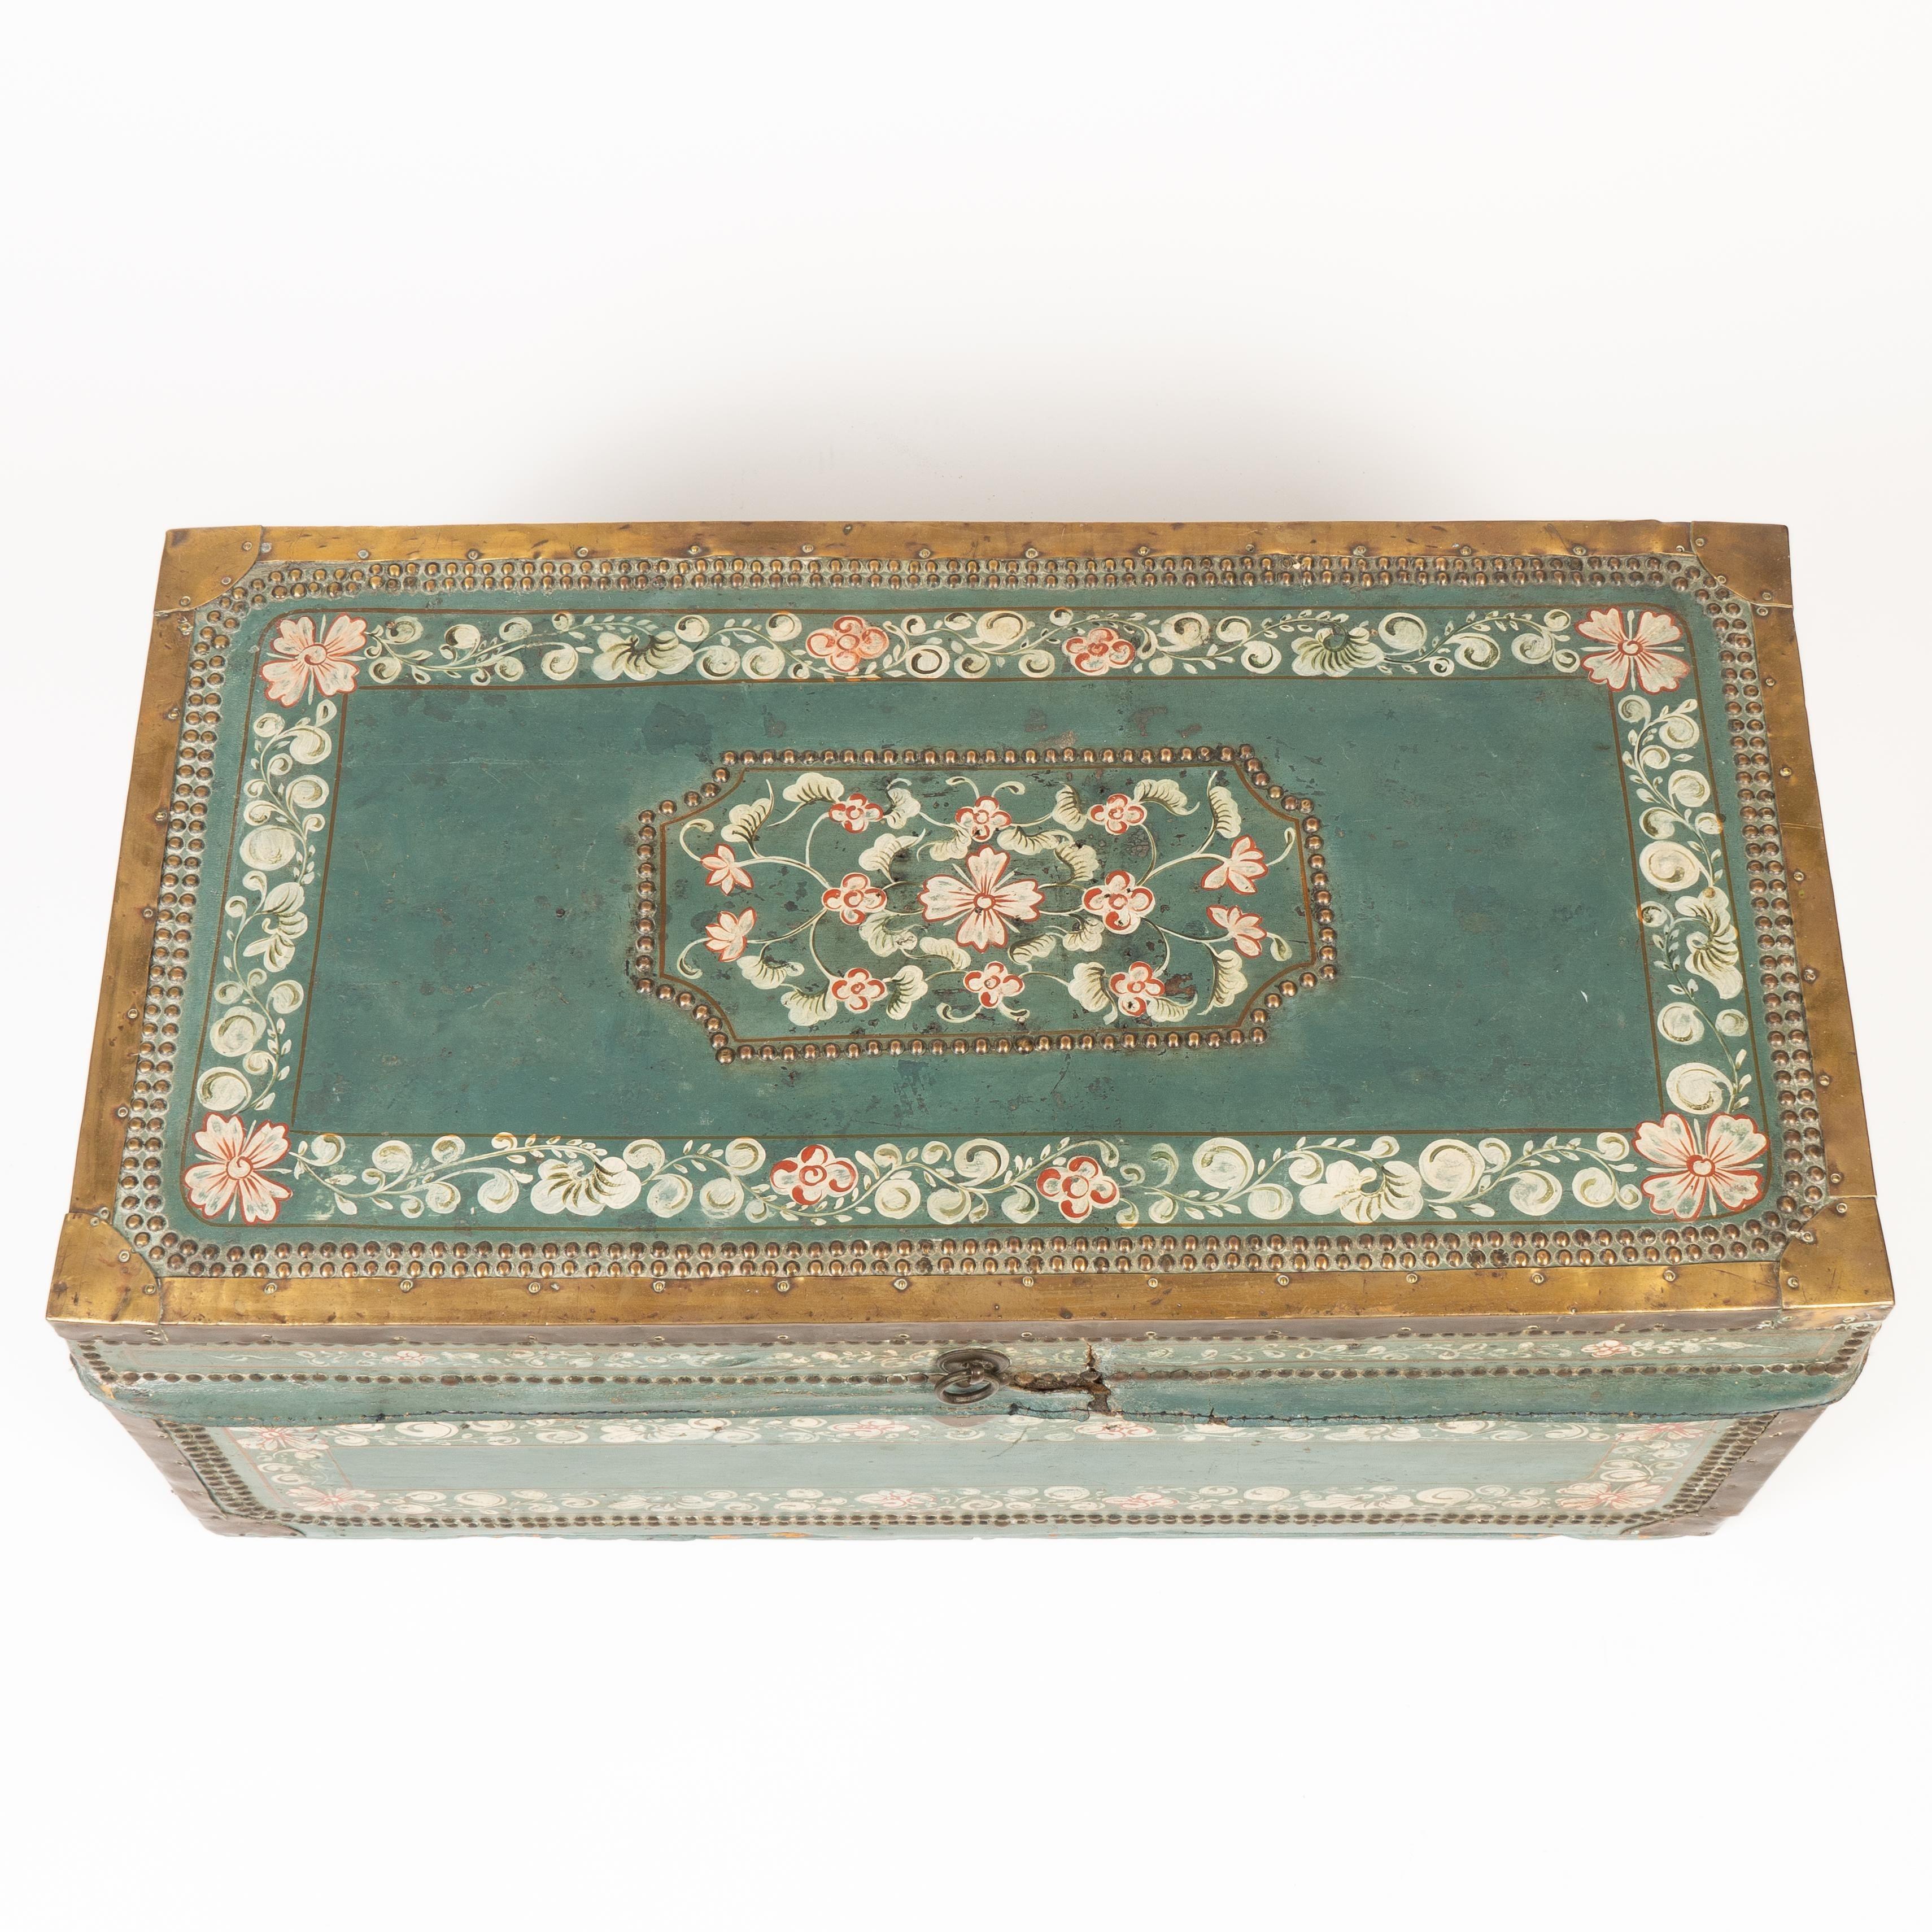 Early 19th Century Chinese Decorated Blue Leather Covered Wood Trunk In Good Condition For Sale In Kenilworth, IL